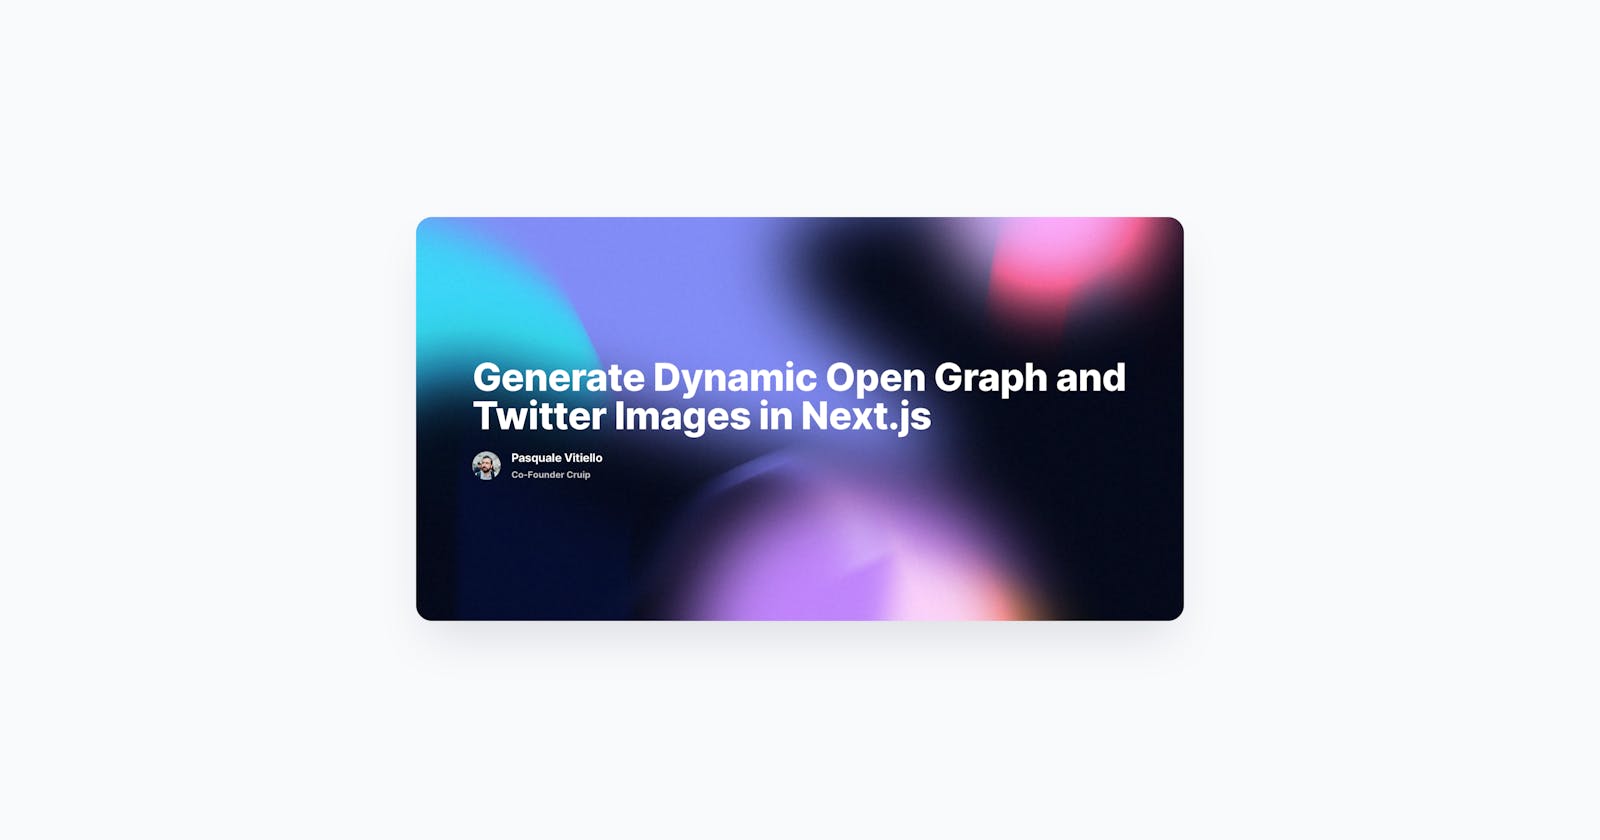 Generate Dynamic Open Graph and Twitter Images in Next.js